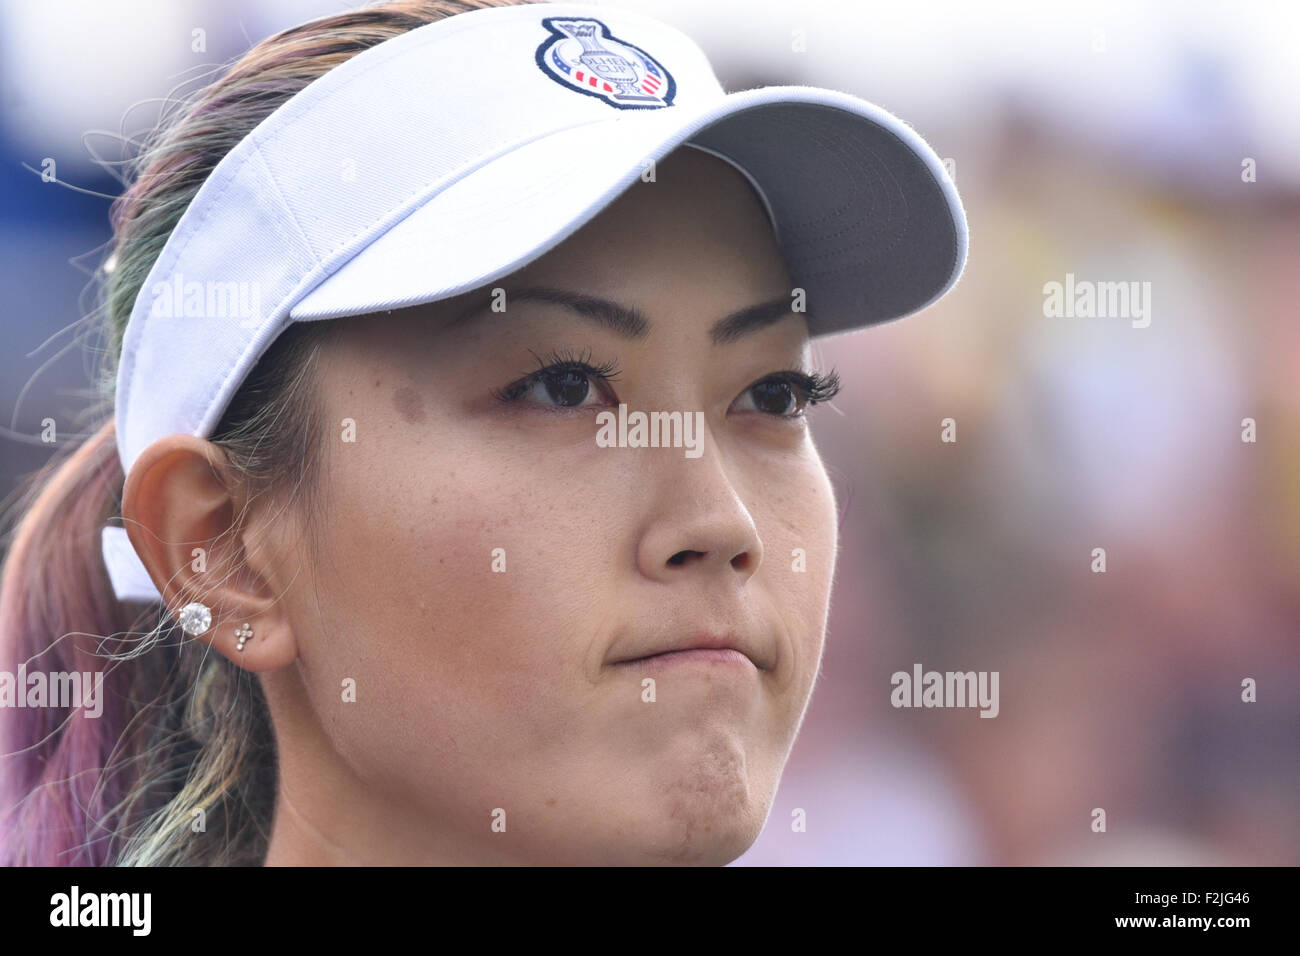 St. Leon-Rot, Germany. 20th Sep, 2015. US golfer Michelle Wie during the Solheim Cup in St. Leon-Rot, Germany, 20 September 2015. Two teams consisting of the best twelve professional female golfers from Europe and the United States, respectively, take part in the biennial golfing team tournament, with the competition venues rotating between Europe and the US. Germany is hosting the Solheim Cup for the first time. Photo: UWE ANSPACH/dpa/Alamy Live News Stock Photo